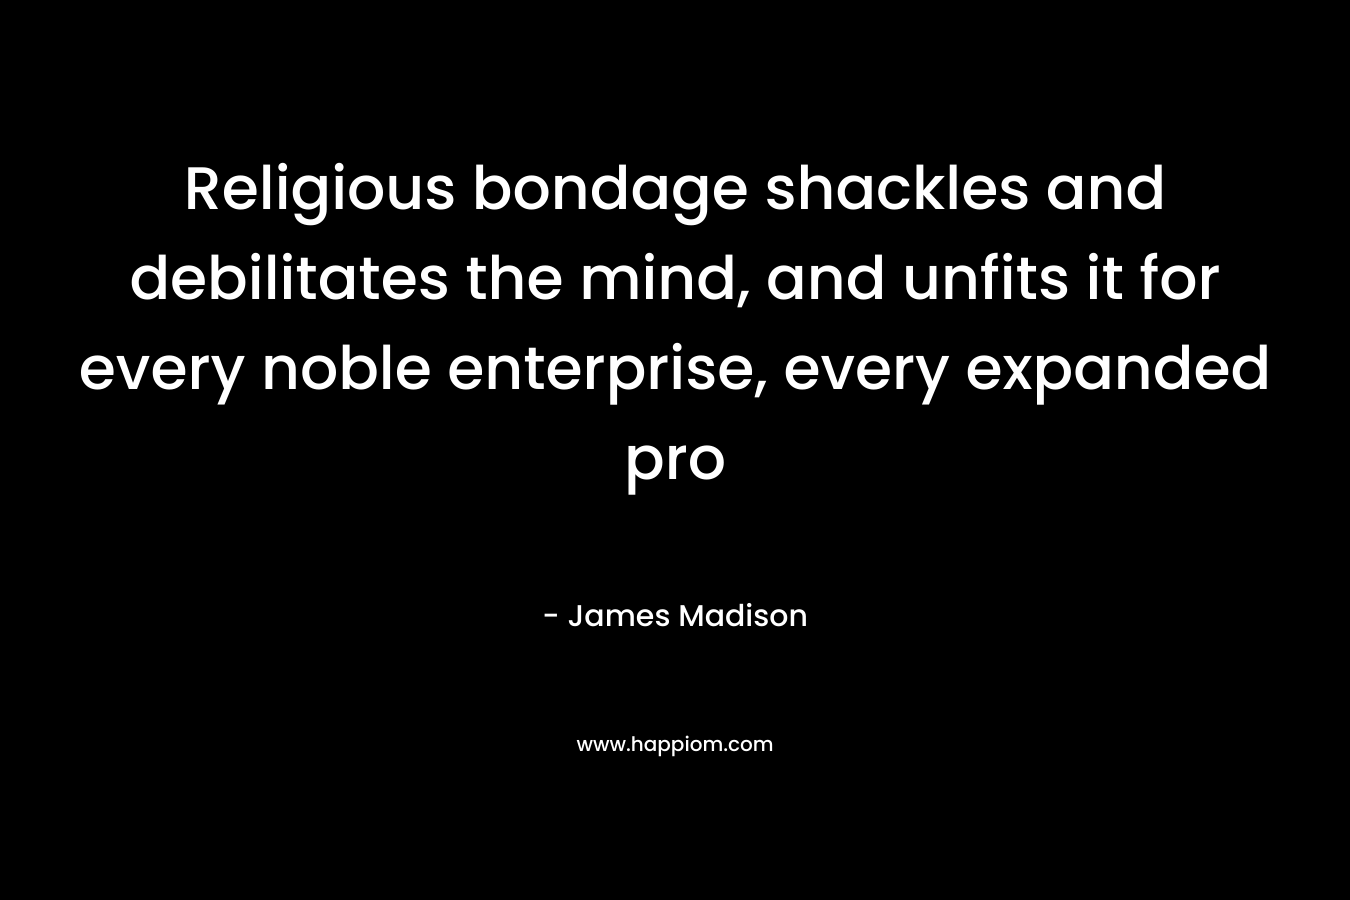 Religious bondage shackles and debilitates the mind, and unfits it for every noble enterprise, every expanded pro – James Madison